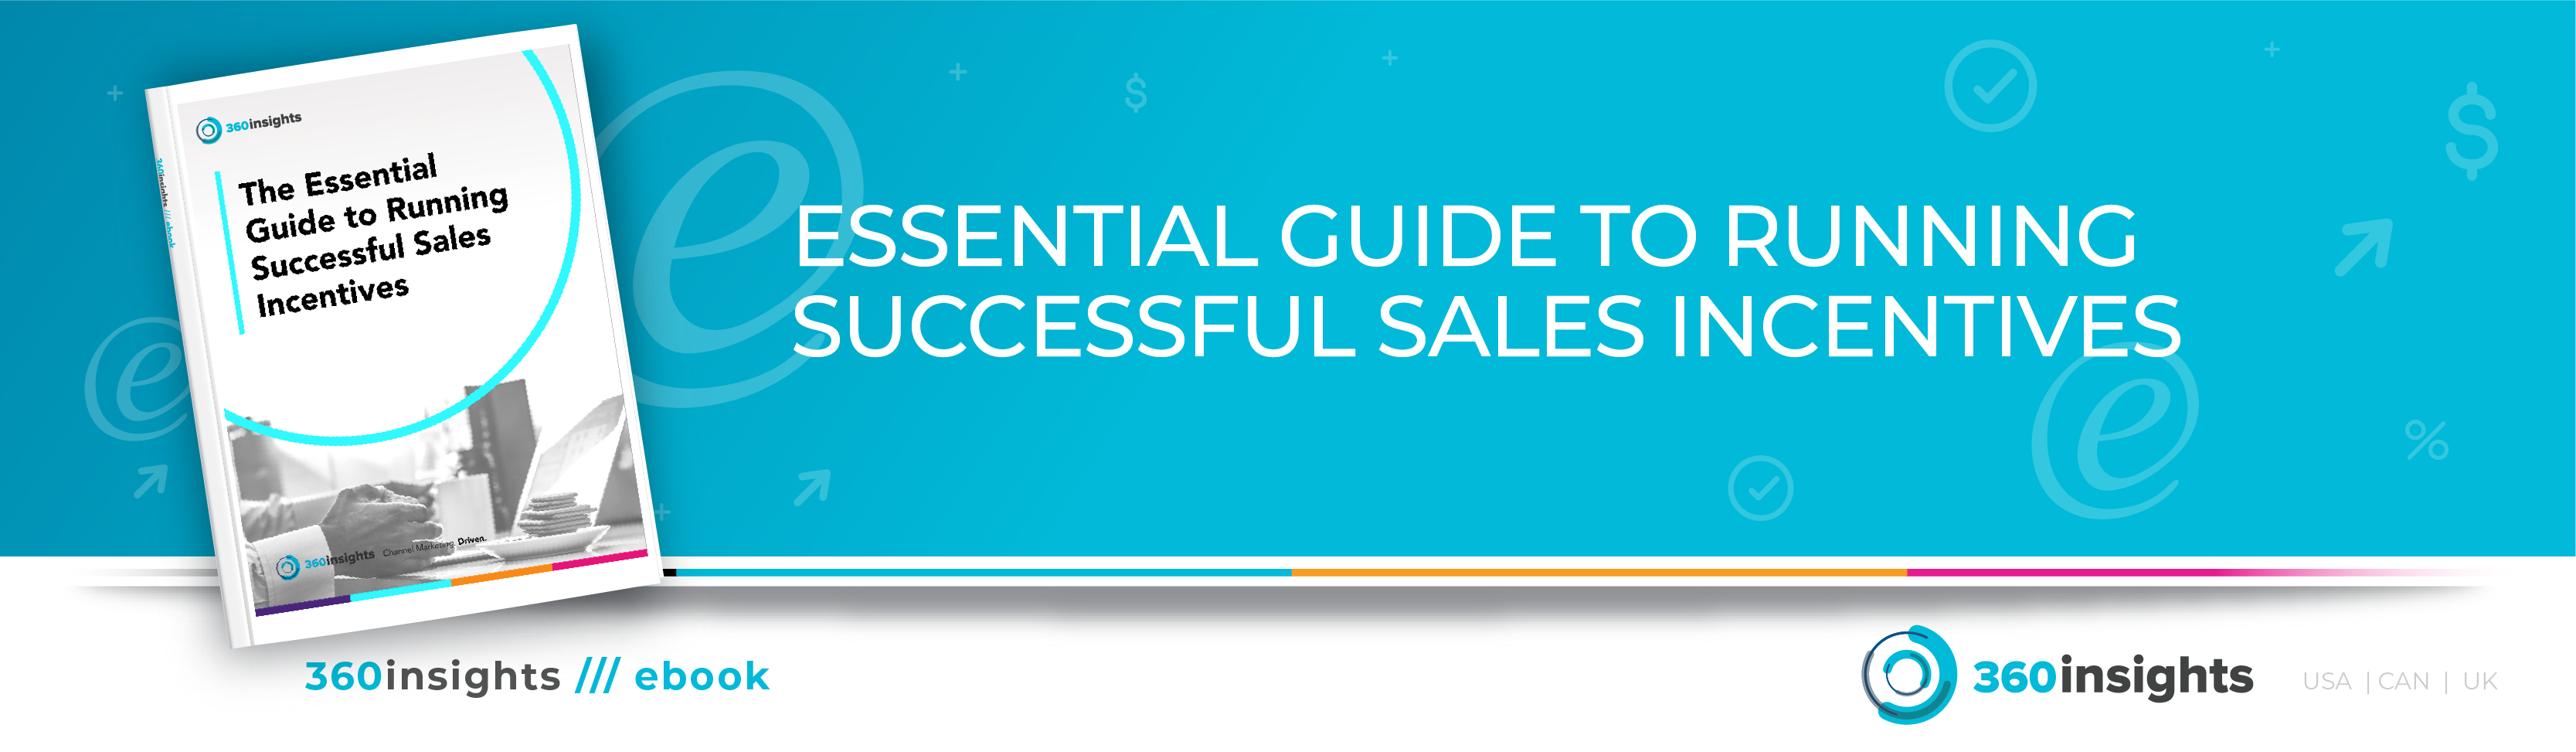 Essential Guide Successful Sales Incentives - LP Banner